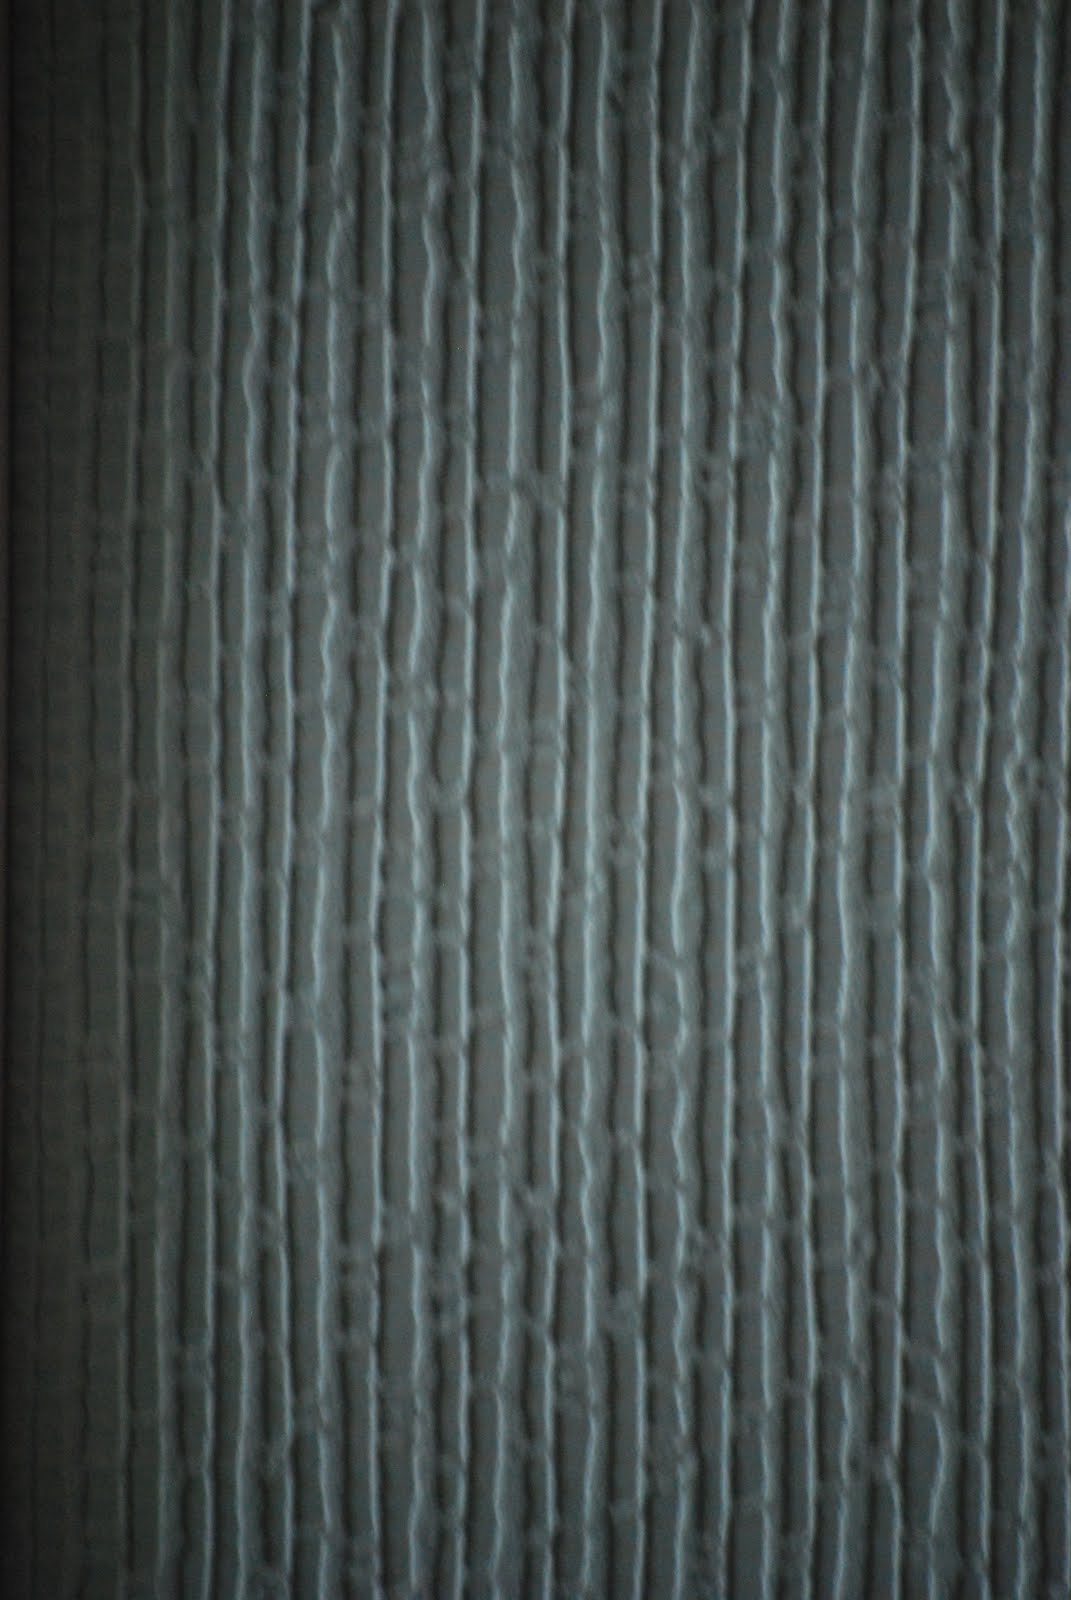 good source for wallpaper is american blinds wallpaper and more